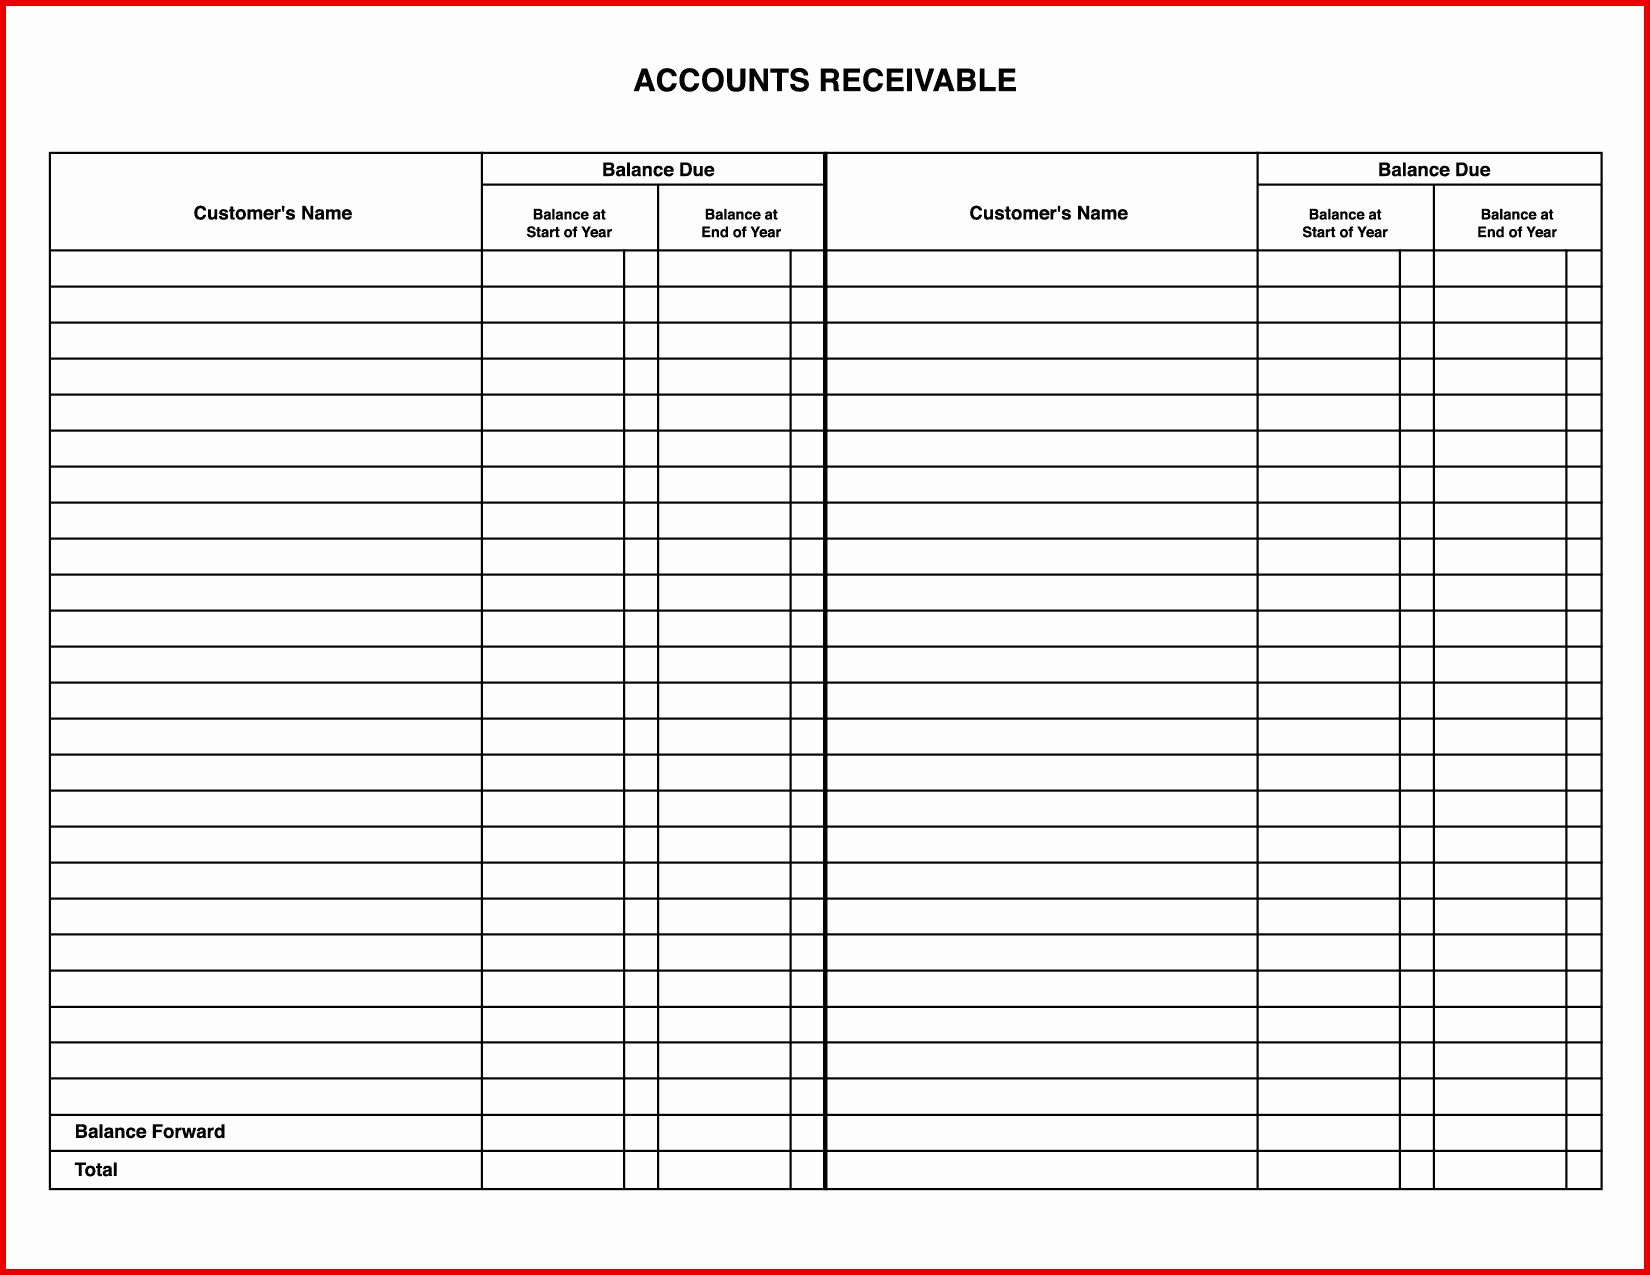 Probate Accounting Template Excel Beautiful Probate Accounting within